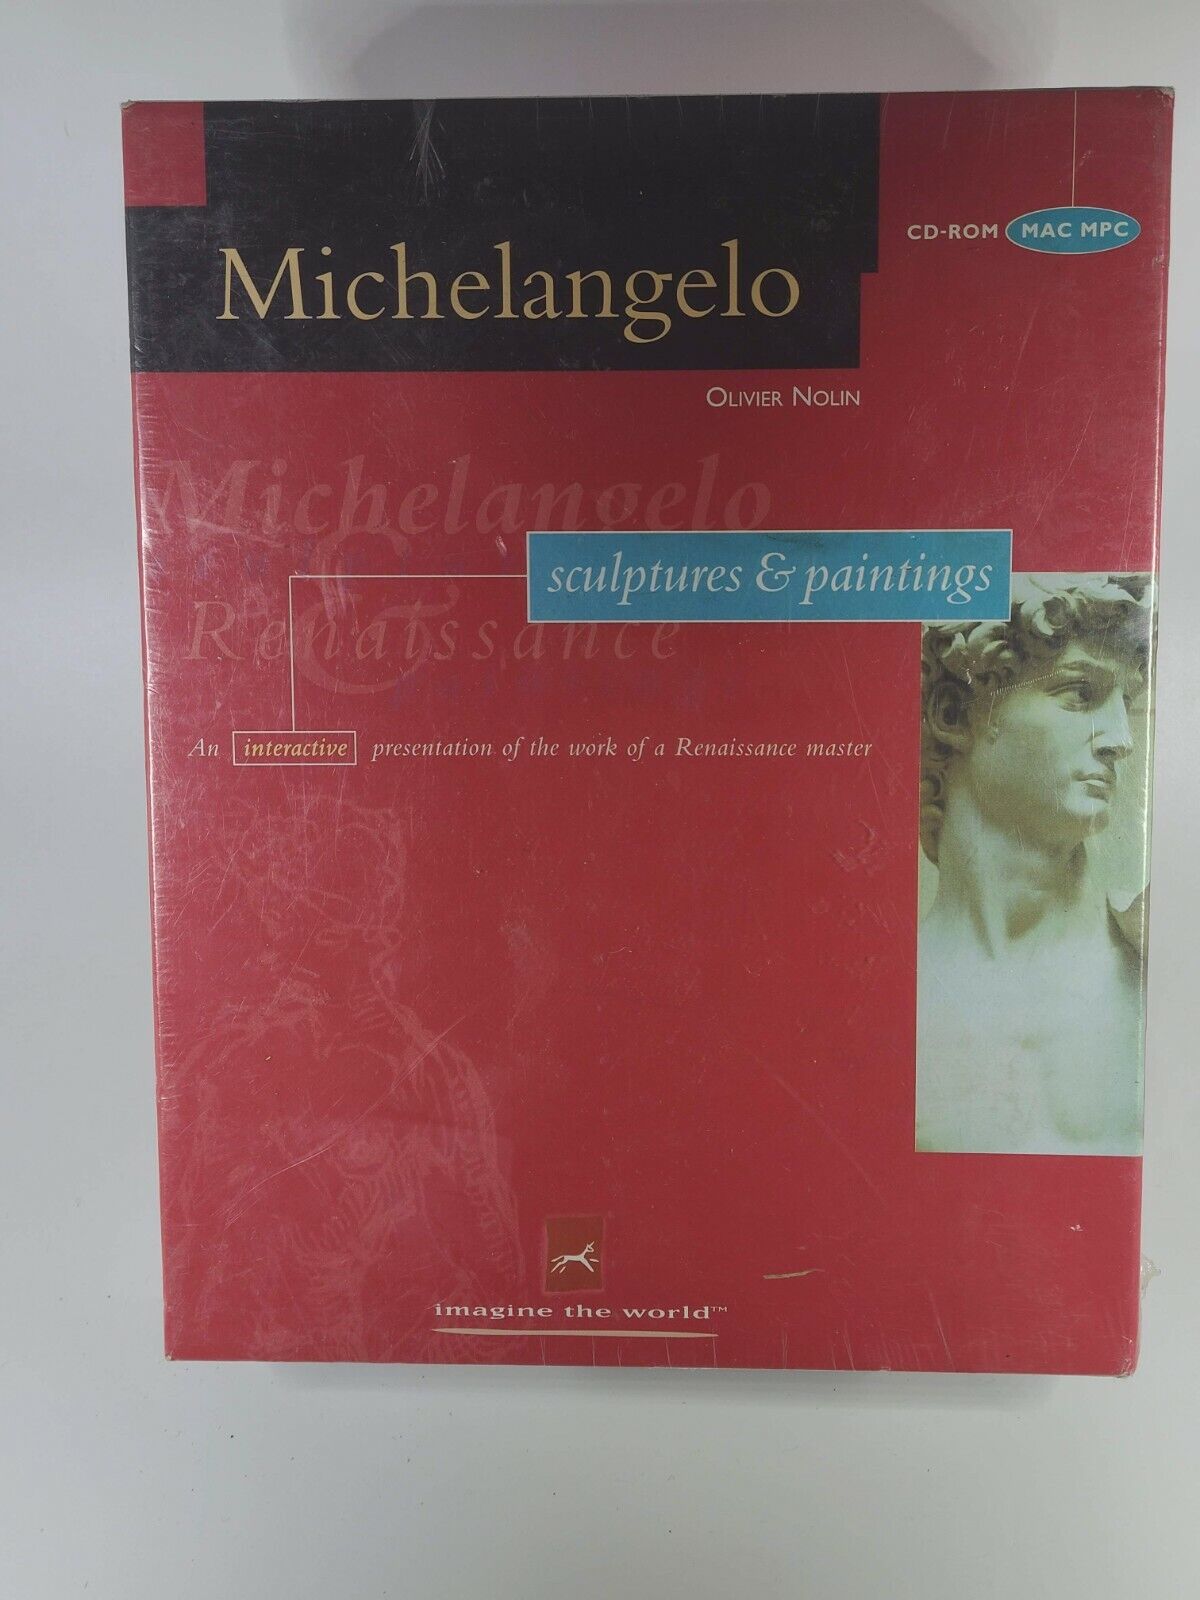 Michelangelo, Sculptures & Paintings by Olivier Nolin (1997, CD-ROM) New